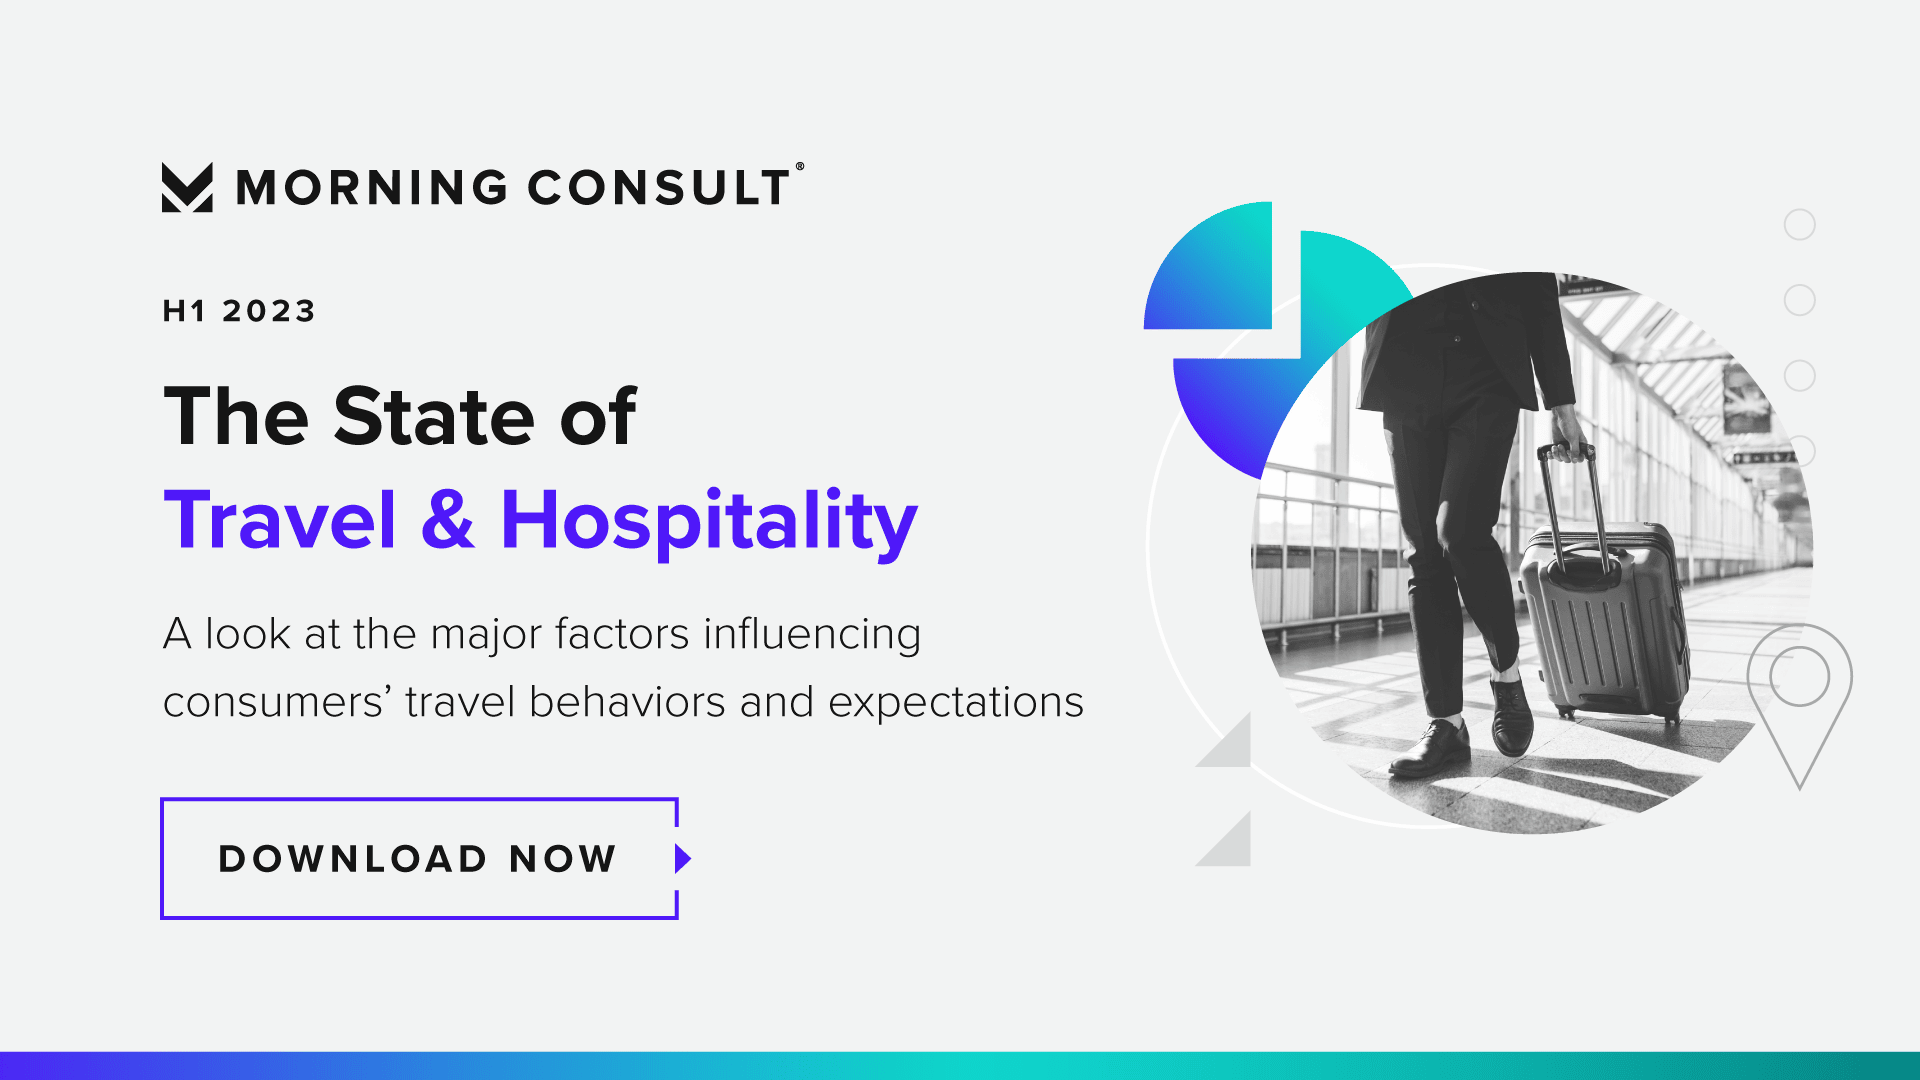 VvV MORNING CONSULT H1 2023 The State of Travel Hospitality A look at the major factors influencing consumers travel behaviors and expectations DOWNLOAD NOW 